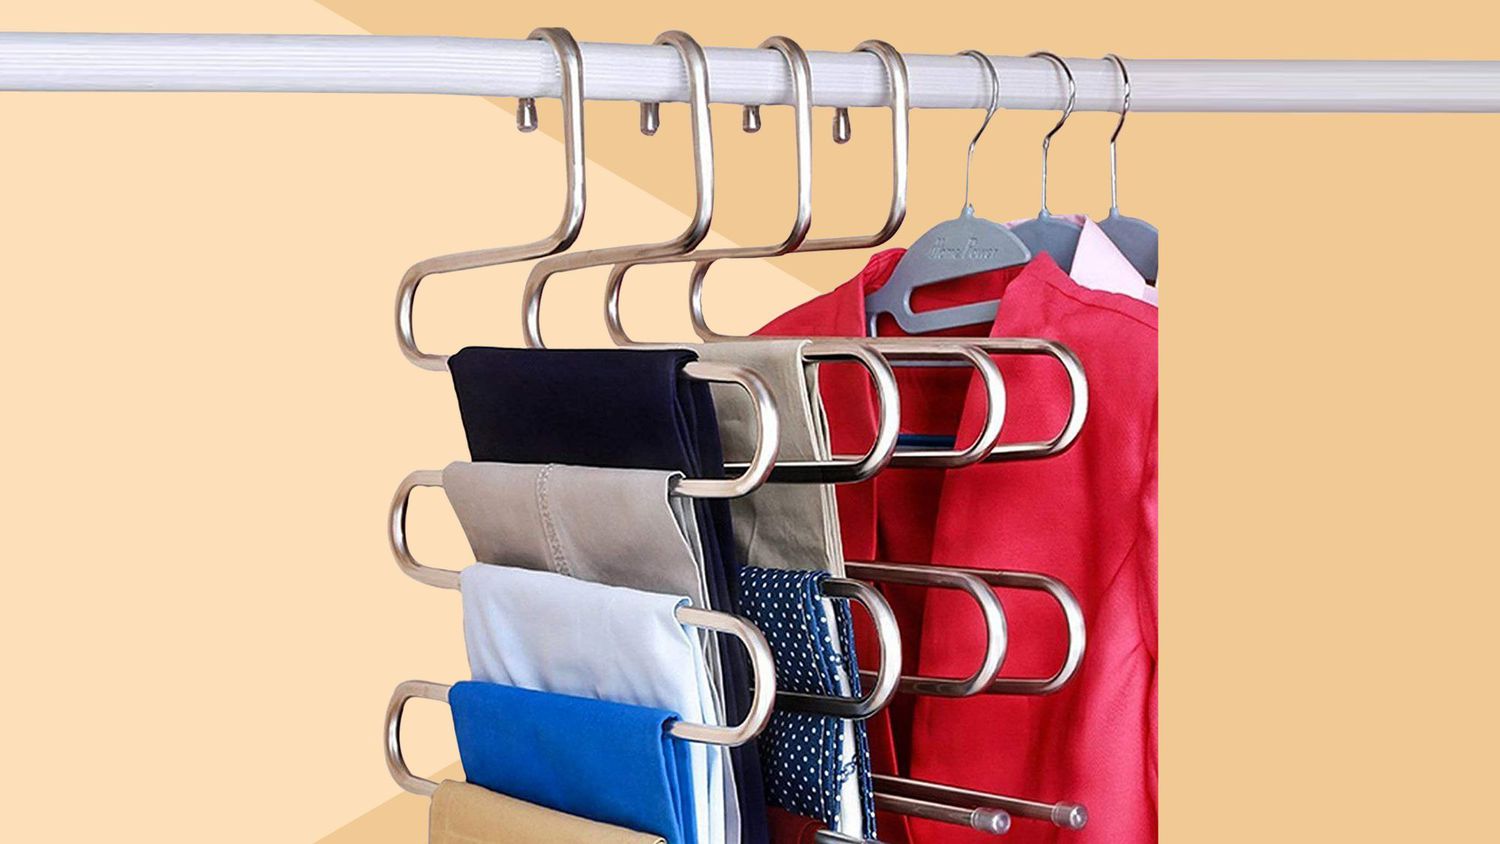 DOIOWN S-Type Stainless Steel Clothes Pants Hangers Closet